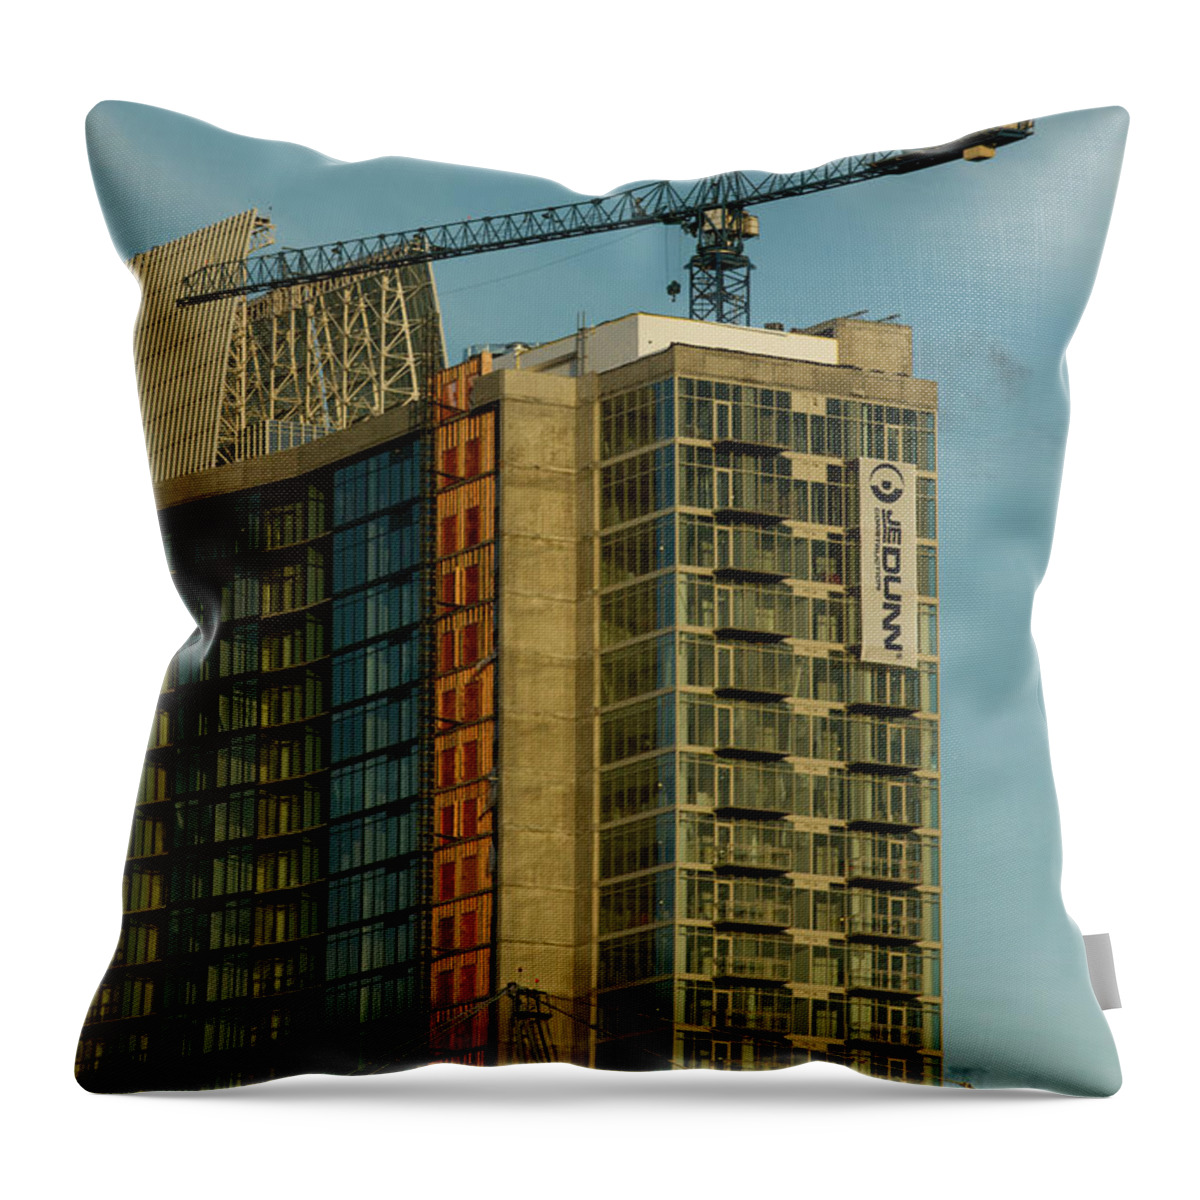 Cranes Images Throw Pillow featuring the photograph Over Your Head Cranes Atlanta Construction Art by Reid Callaway